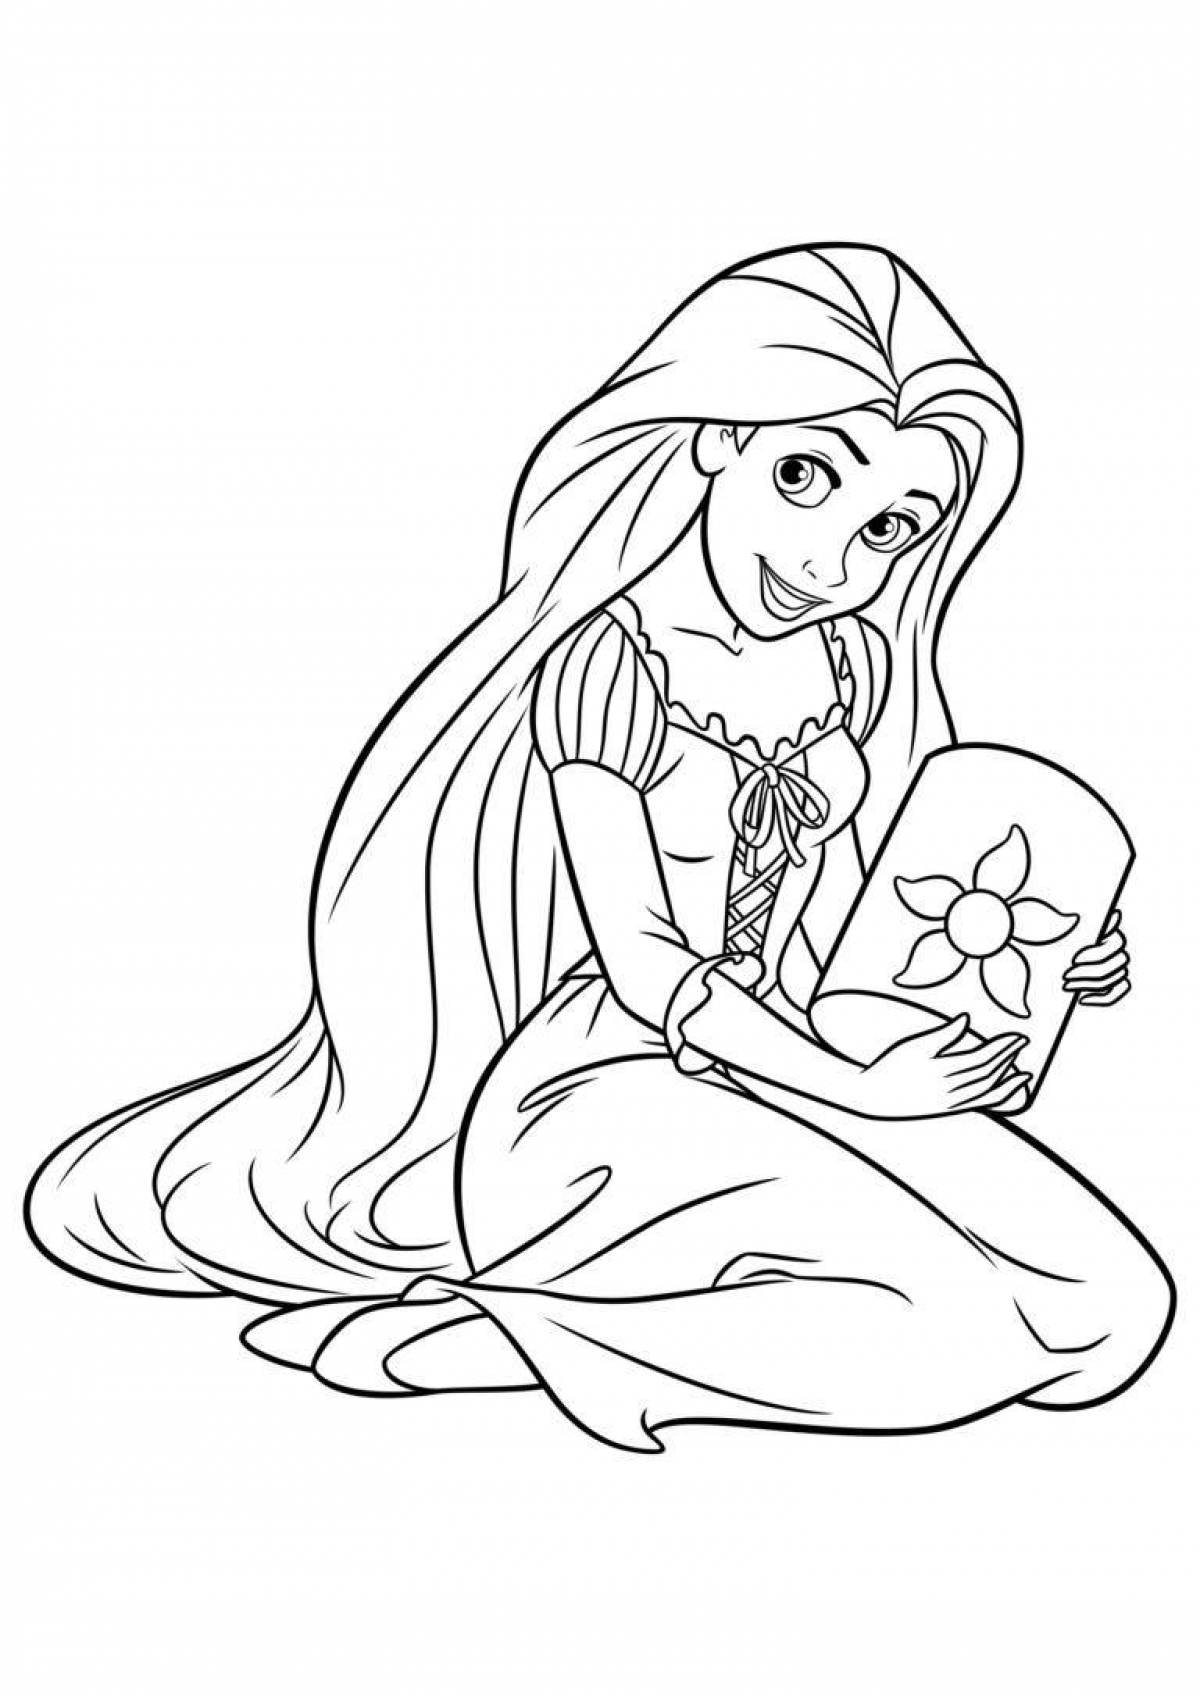 Colorful rapunzel coloring book for kids